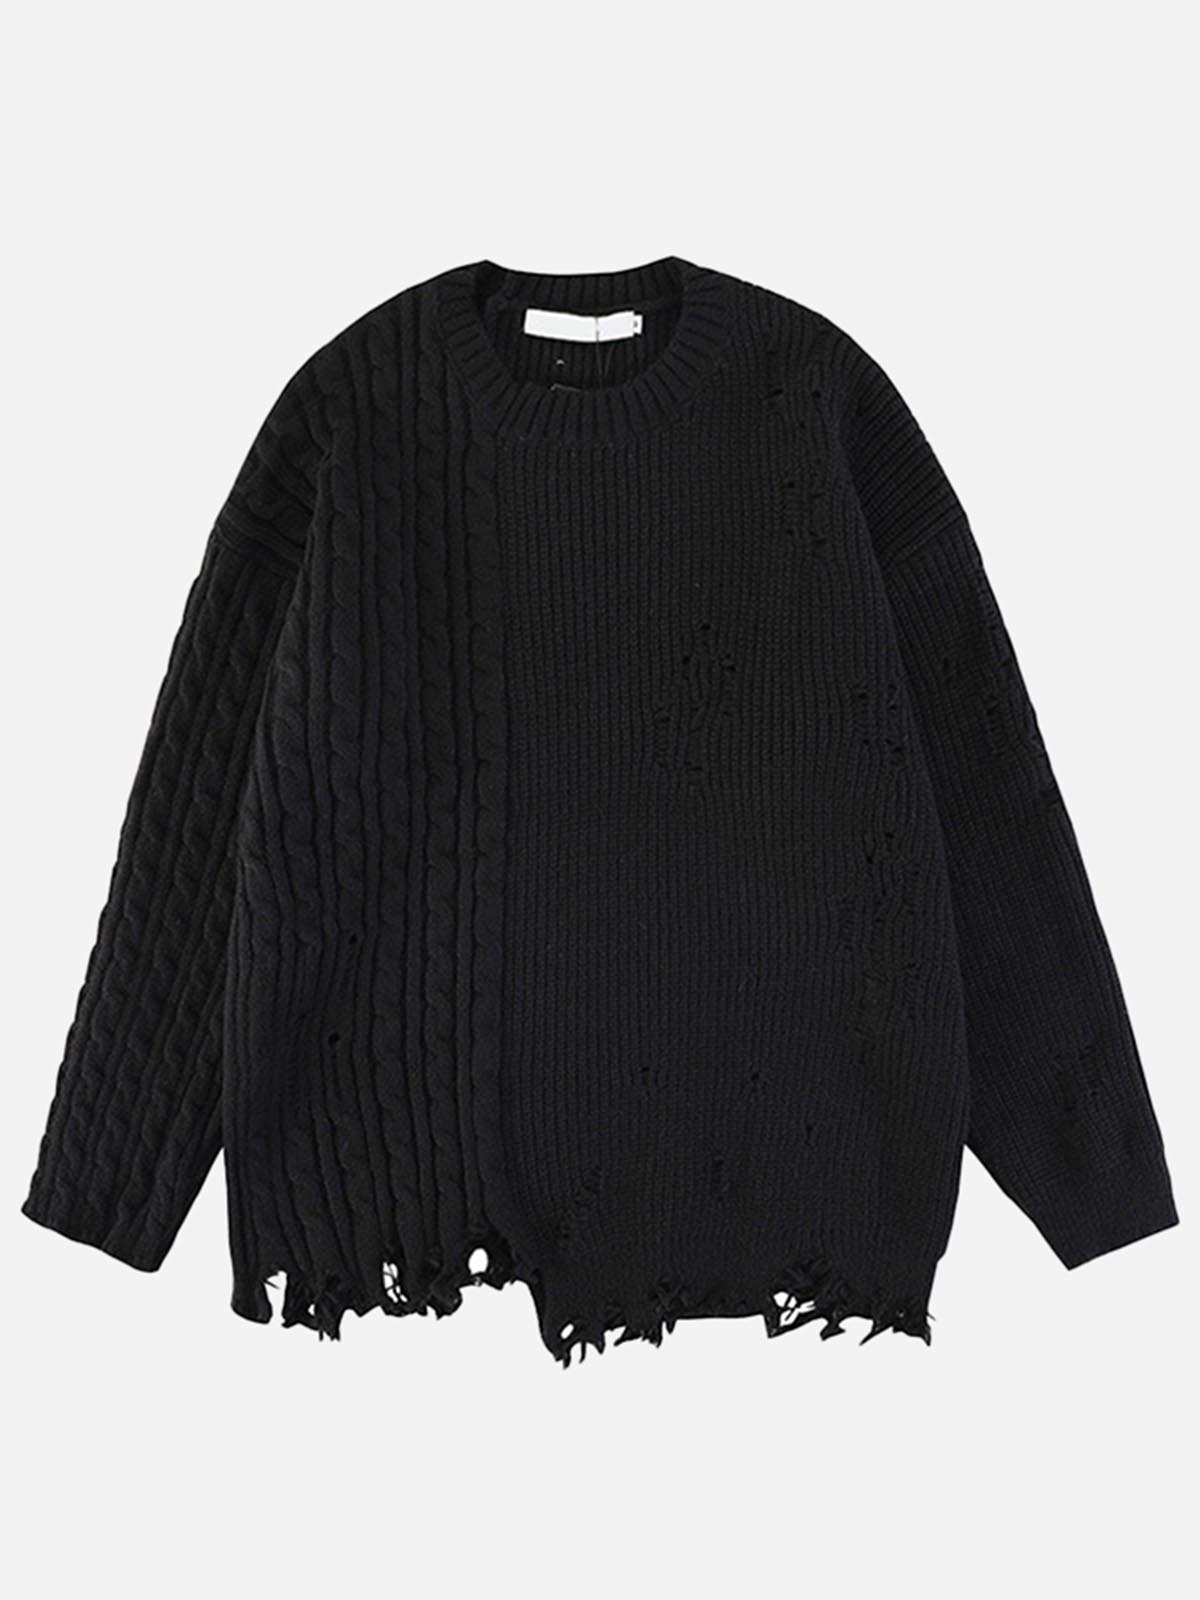 CYD URBAN SPLICE HOLES KNITTED SWEATER